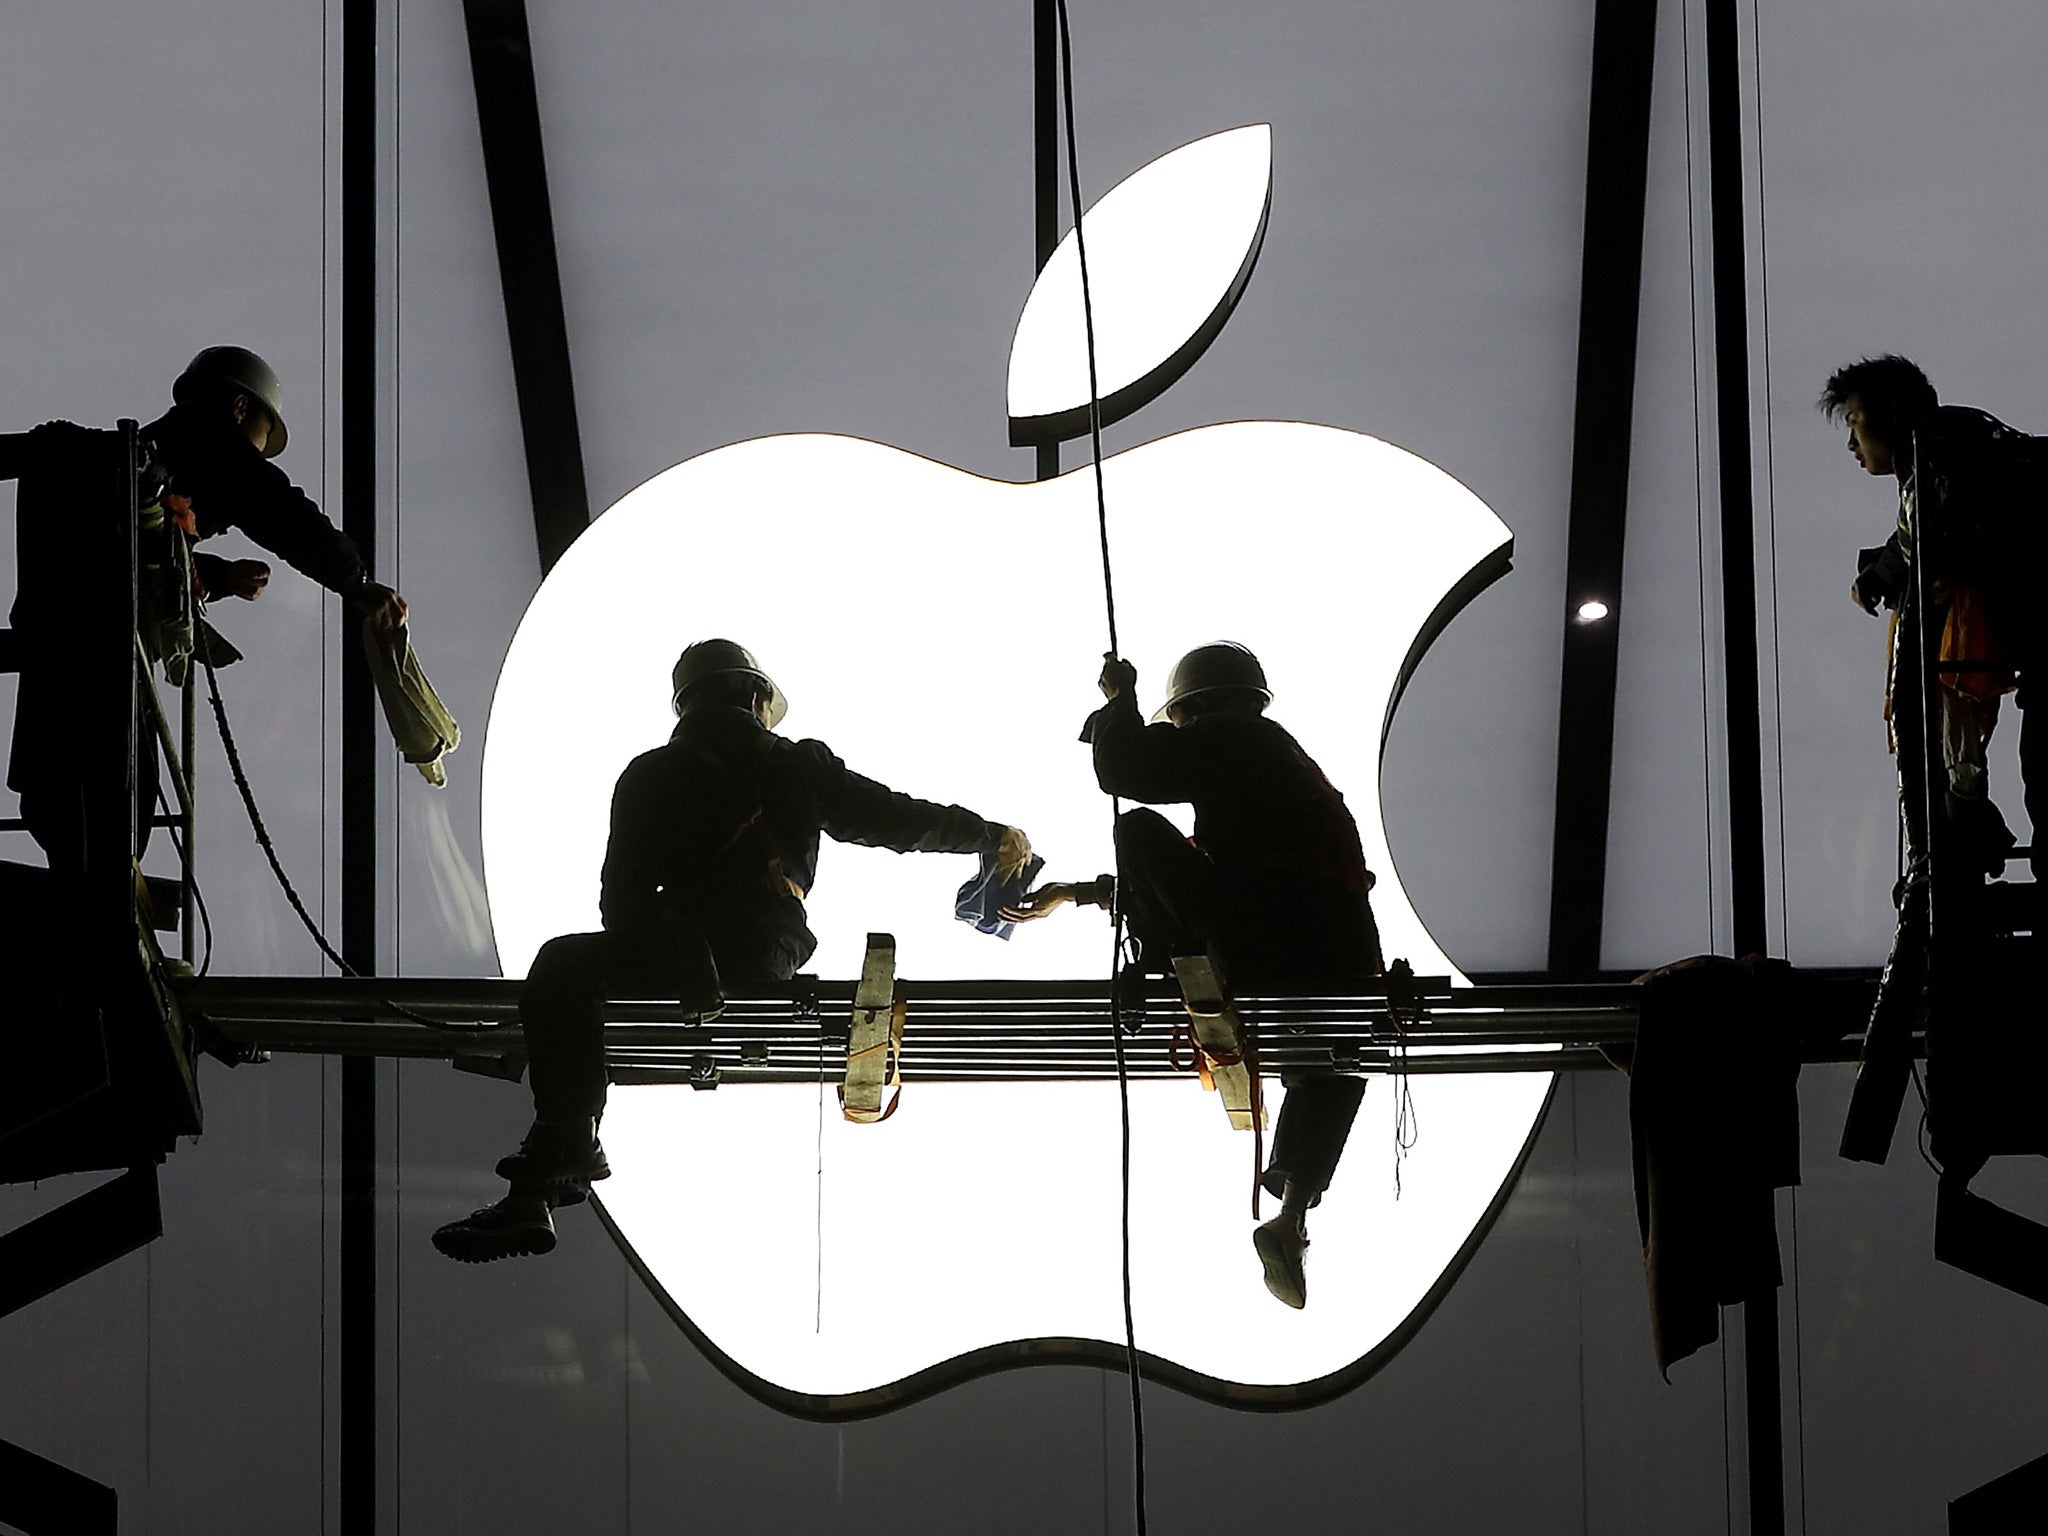 Workers prepare for the opening of an Apple Store in Hangzhou, China